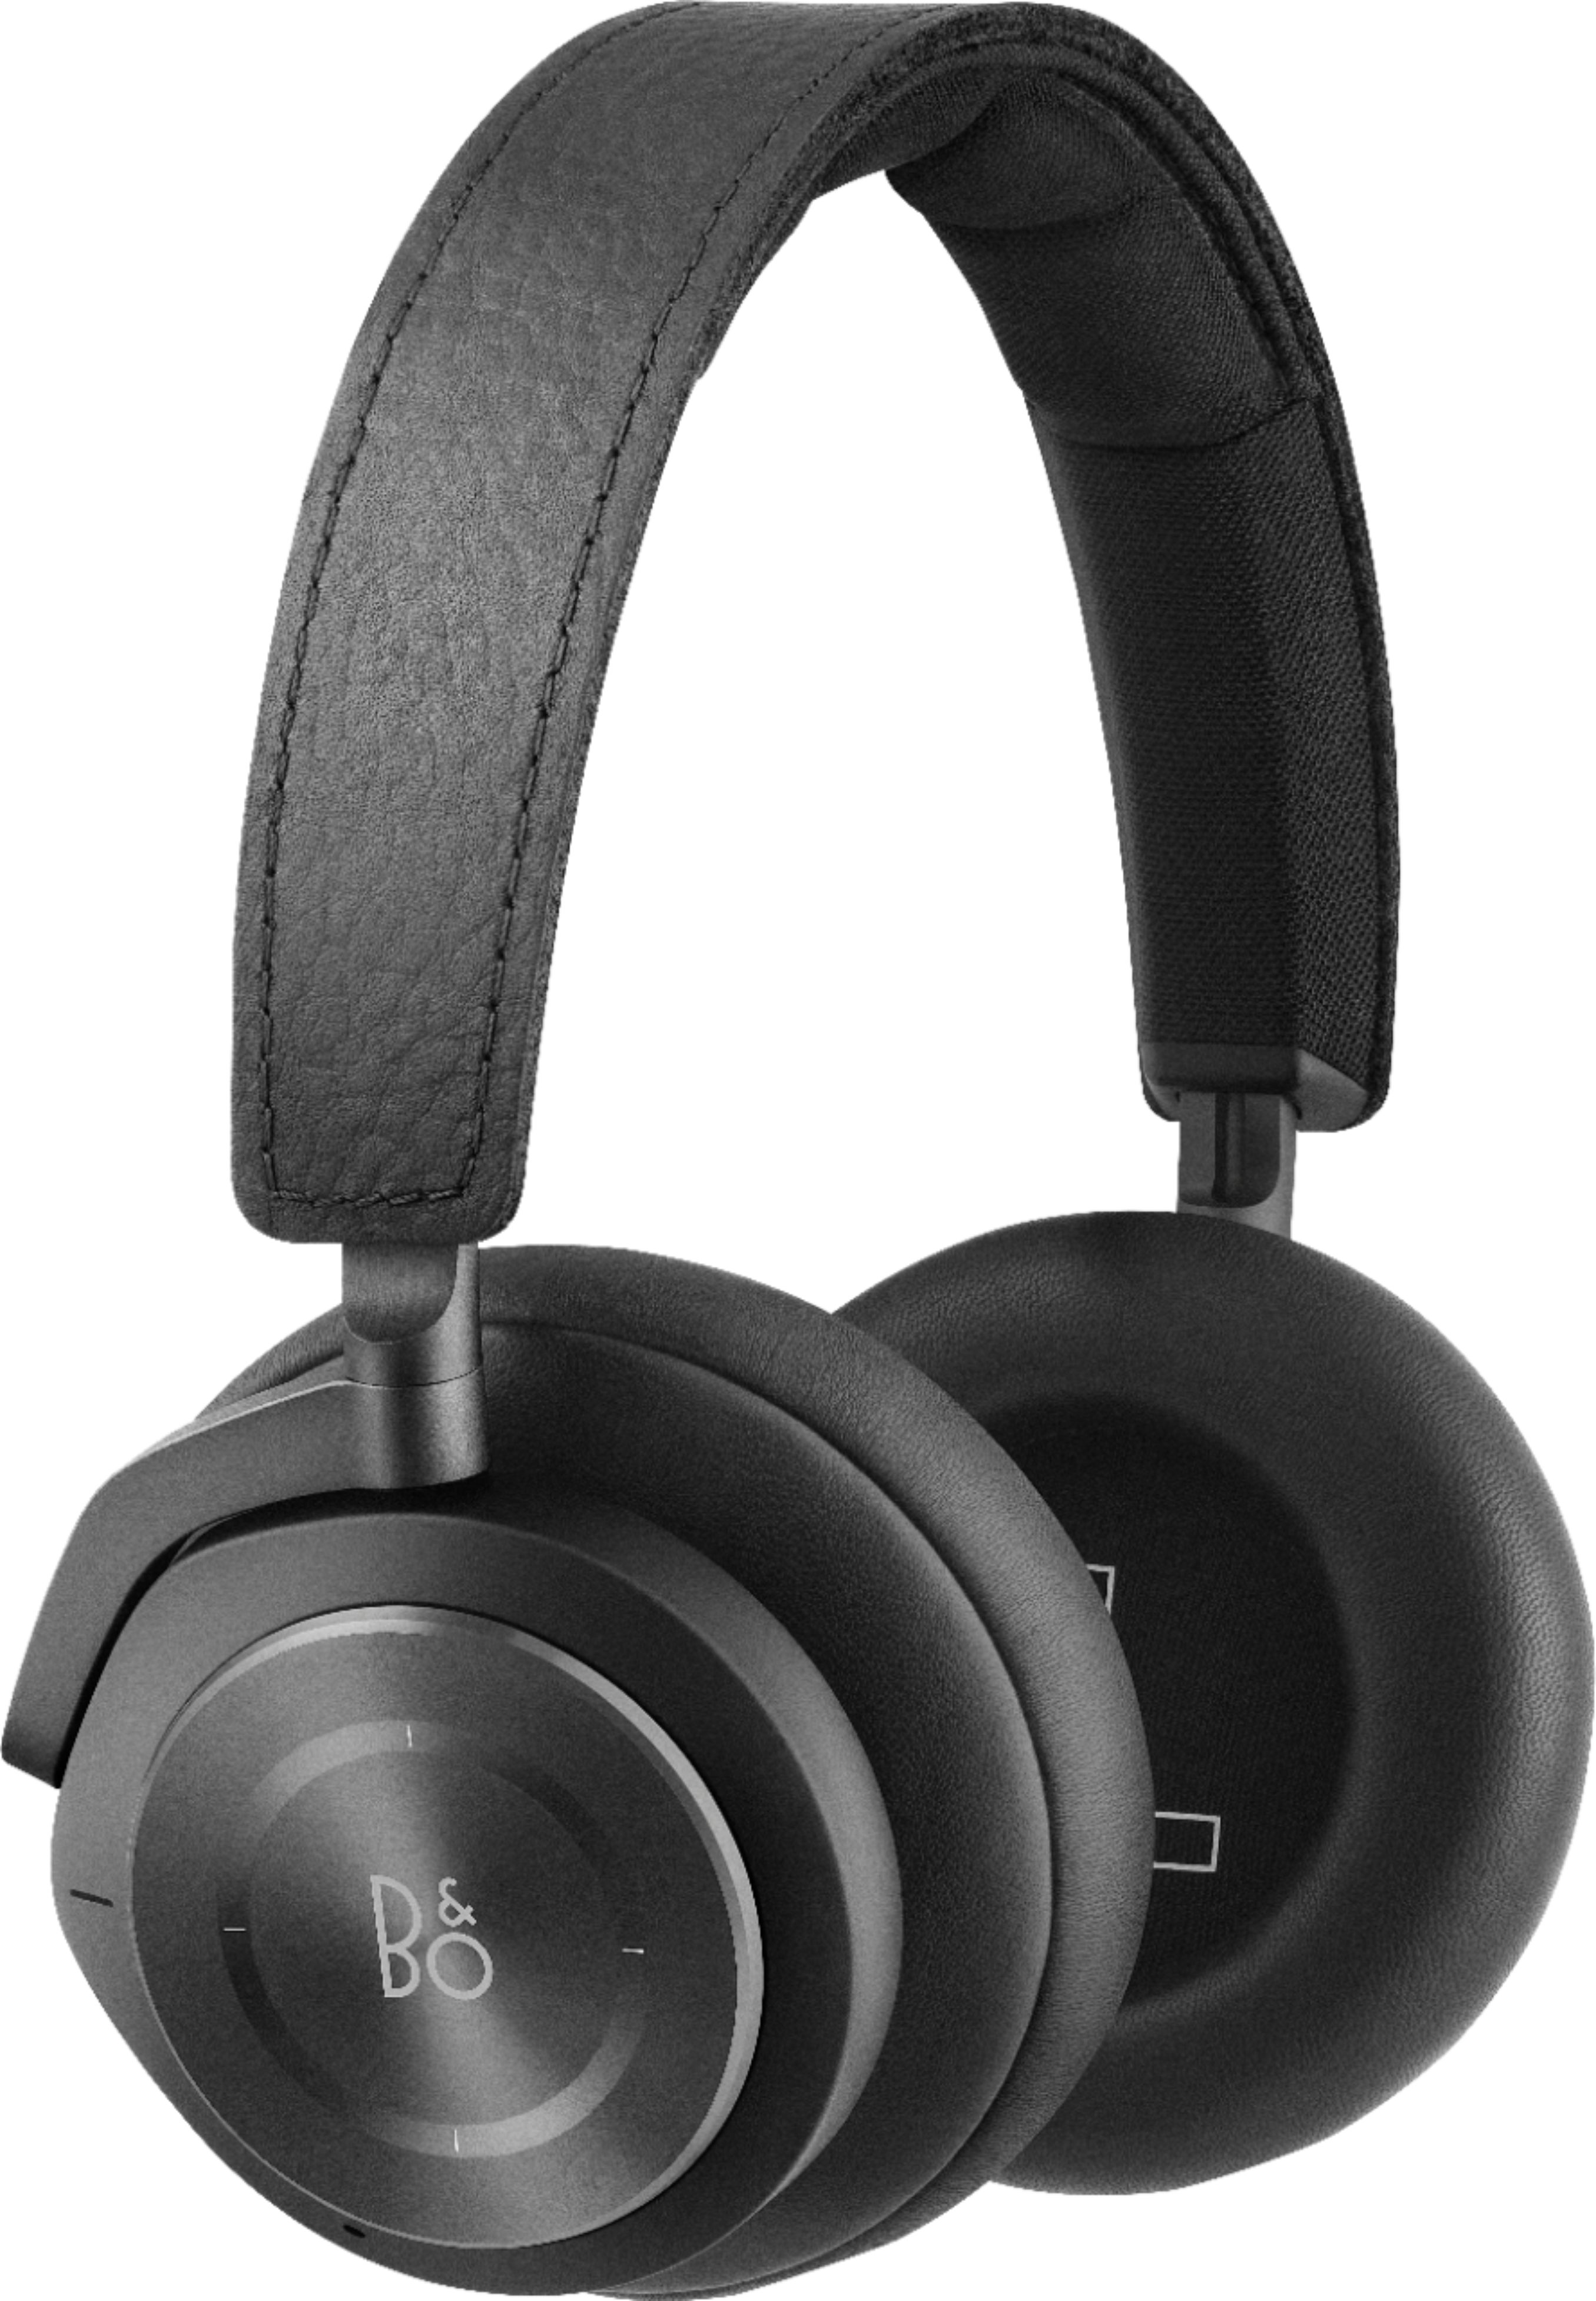 Stolthed apotek Burma Bang & Olufsen Beoplay H9i Wireless Noise Cancelling Over-the-Ear  Headphones Black 50563BBR - Best Buy